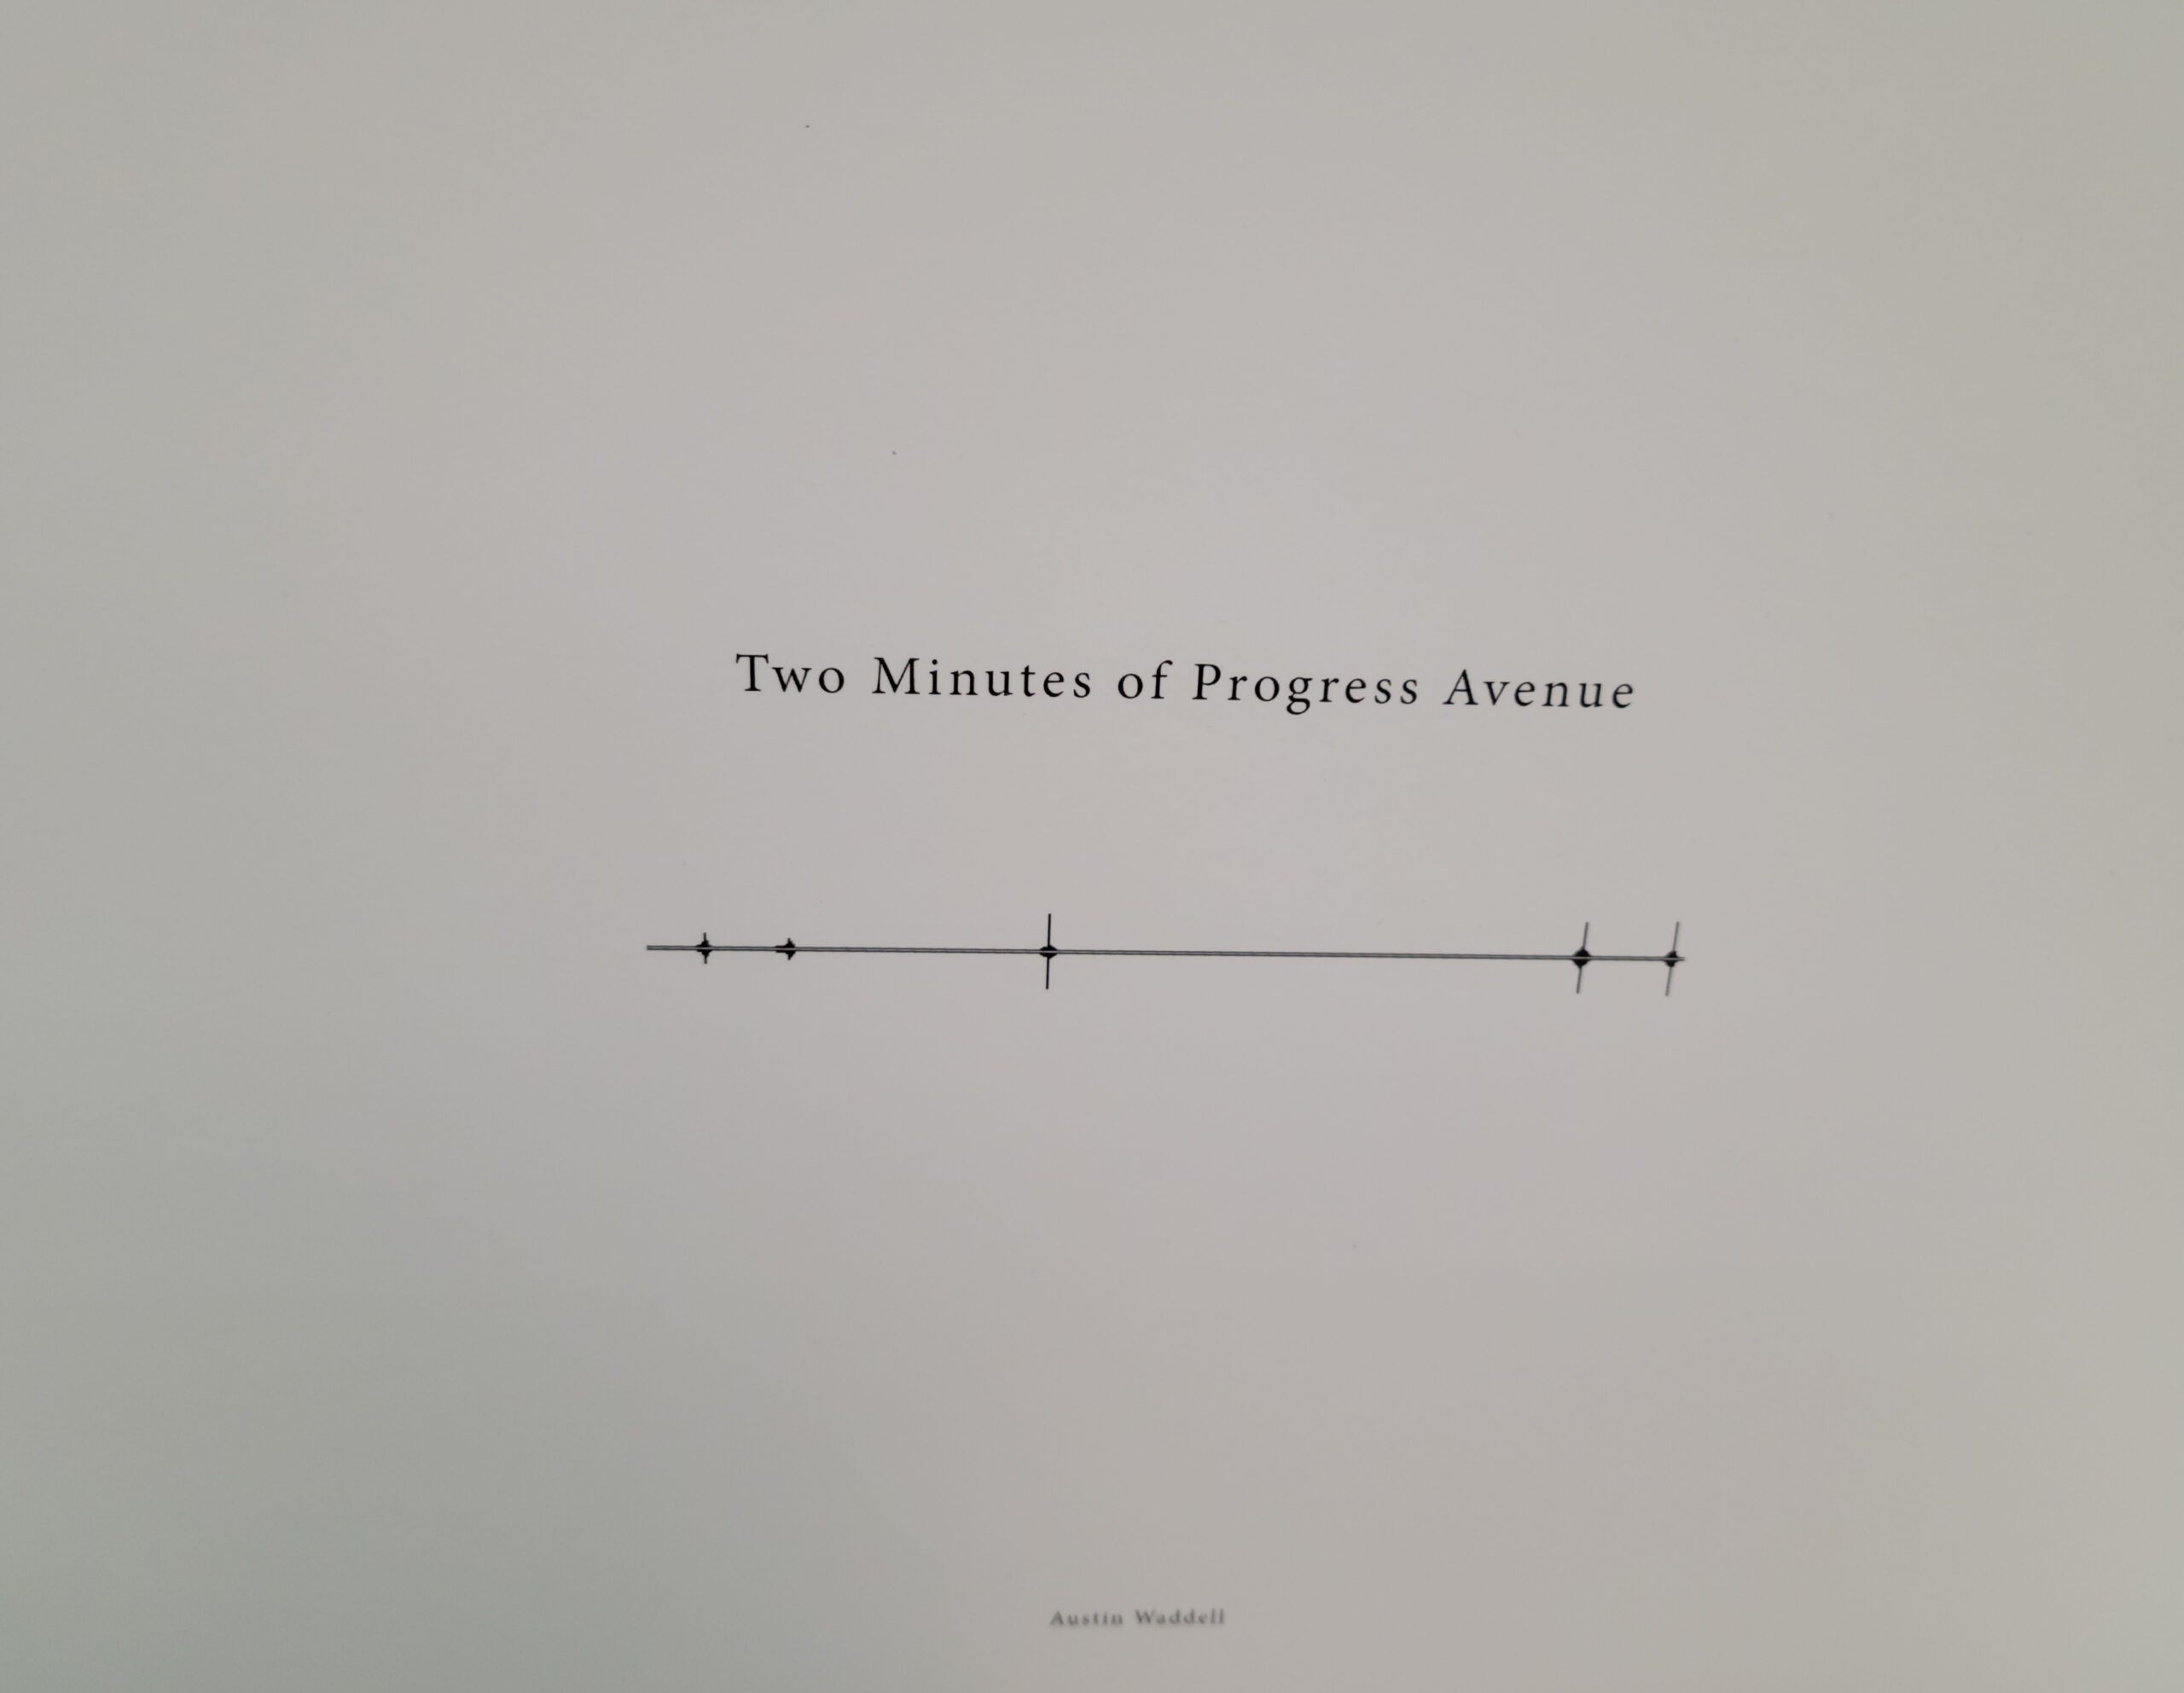 Photograph of front page of book Two Minutes of Progress Avenue by Austin Waddell